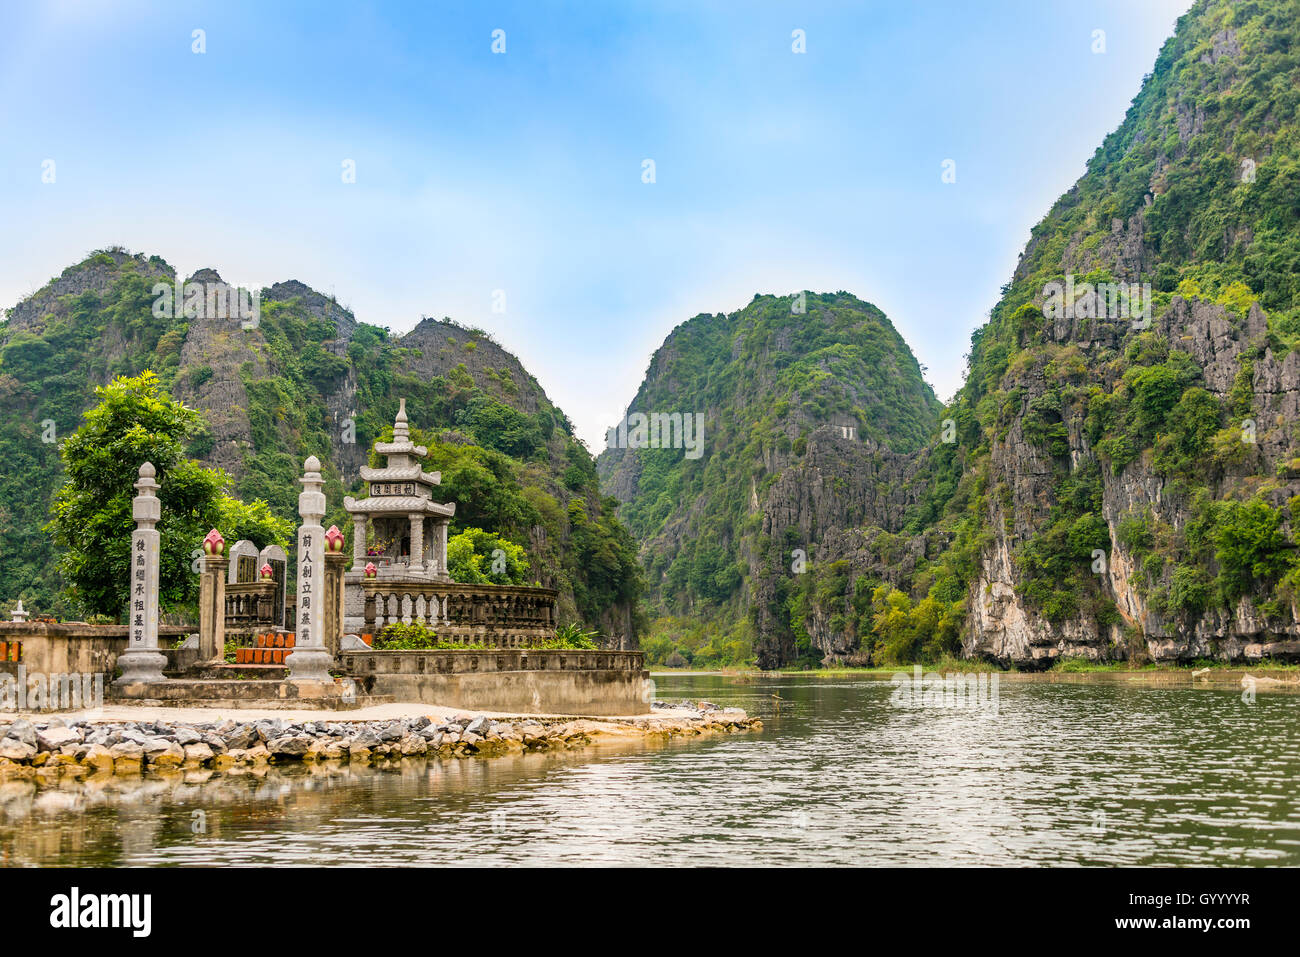 Small temple with forested limestone rocks, karst mountains, Ngo Dong River, Song Ngô Dong, Tam Coc, Ninh Binh, Vietnam Stock Photo